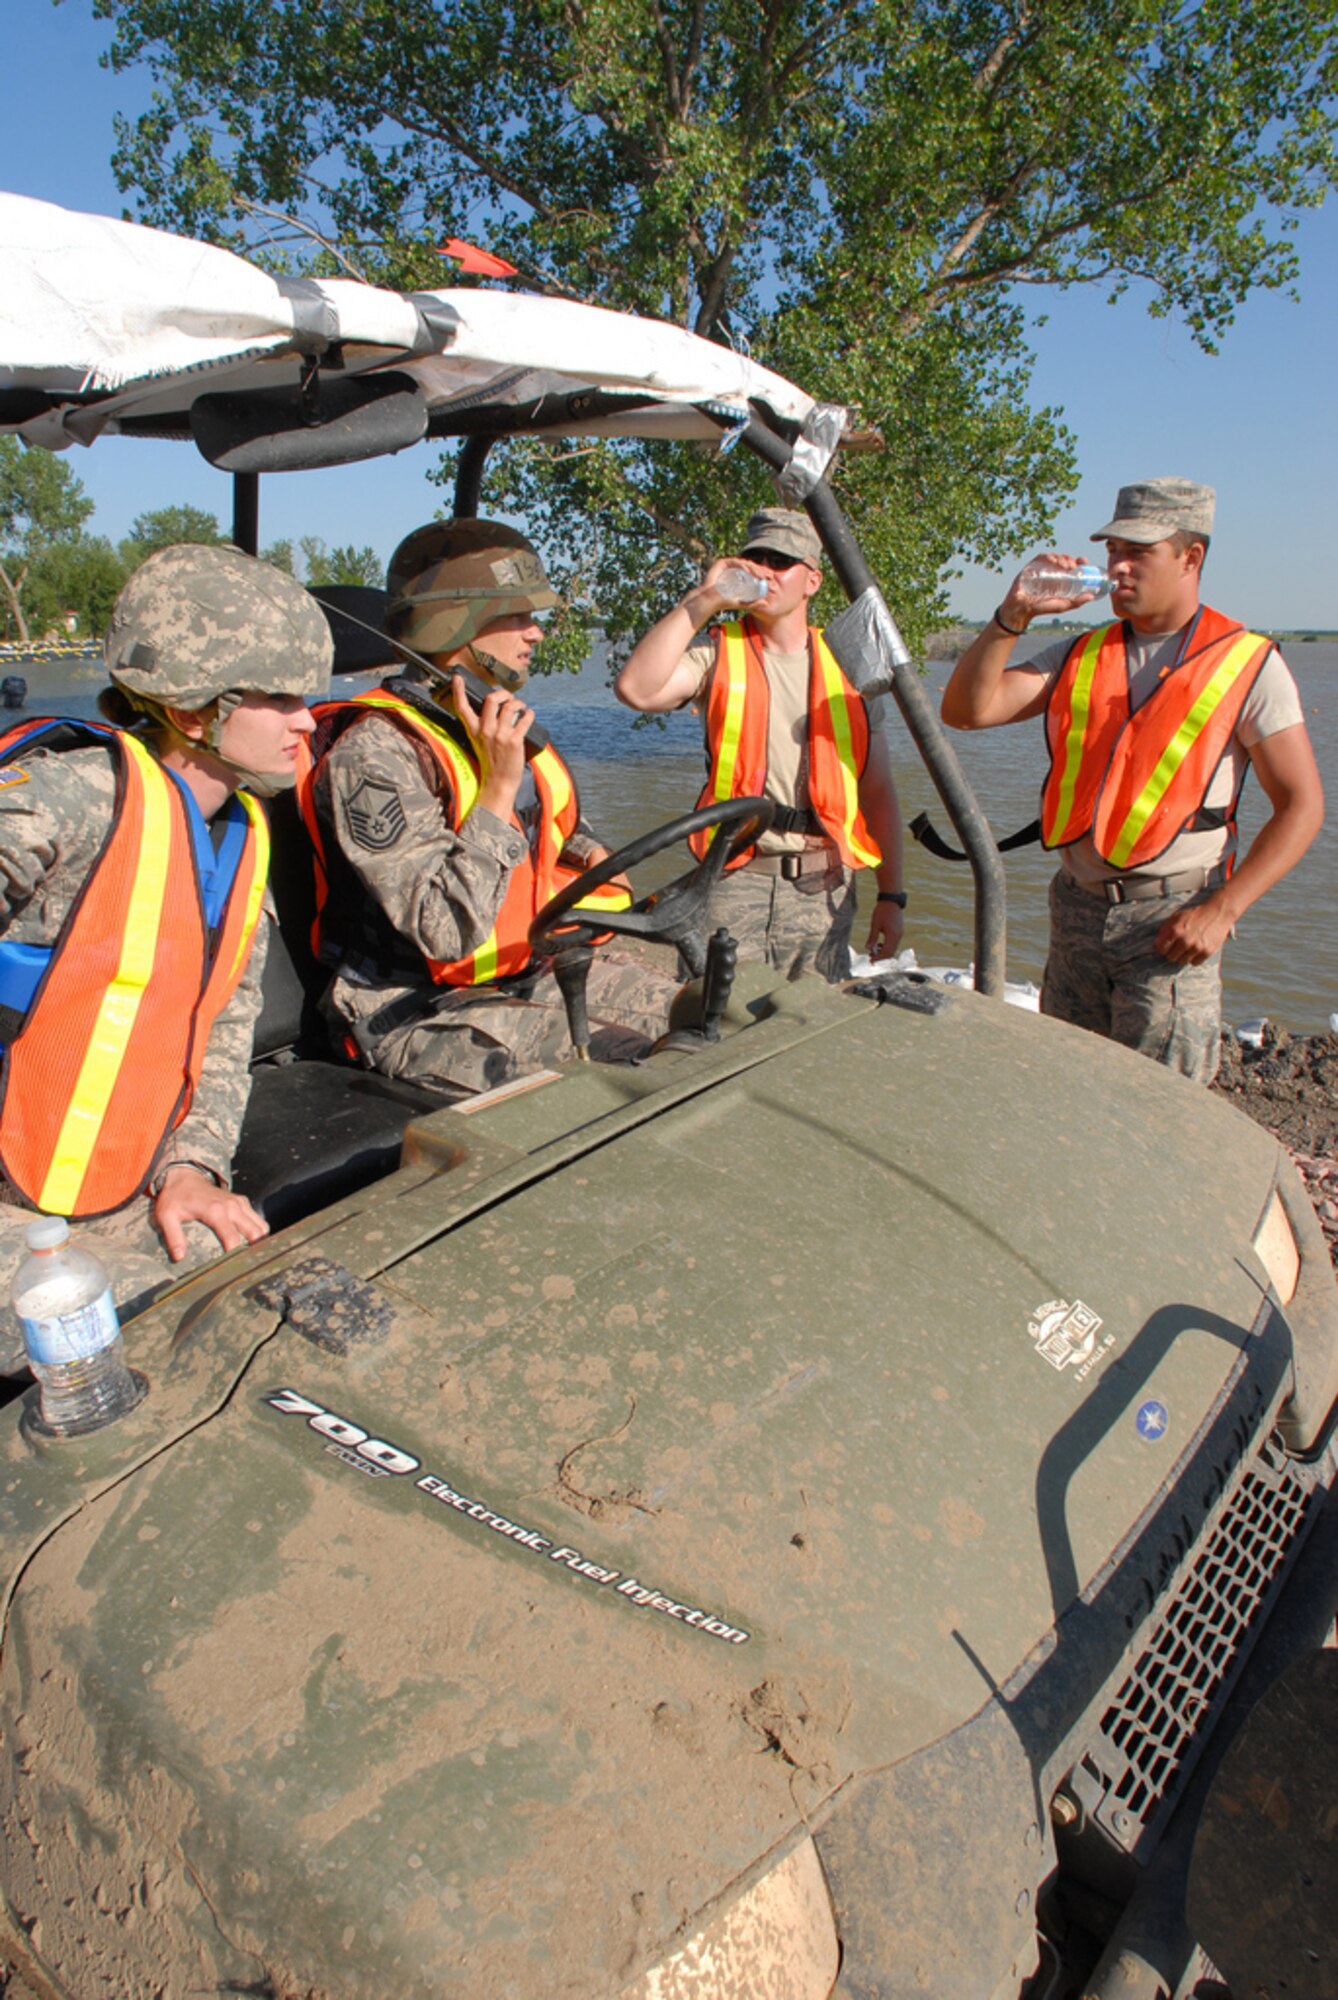 DAKOTA DUNES, S.D. - Sgt. Stephanie Johnson (left) from Jasper, Minn., a member of Medical Command based out of Rapid City and Master Sgt. Angela Pesicka from Parker, a member of the 114th Fighter Wing, Medical Group, pull up in their all-terrain vehicle to offer water to levee patrol members here June 28.  The South Dakota National Guard Soldiers and Airmen are patrolling the levee to monitor for weaknesses which might allow the flooding Missouri River to break through.  (Photo by Tech. Sgt. Quinton Young)(RELEASED)